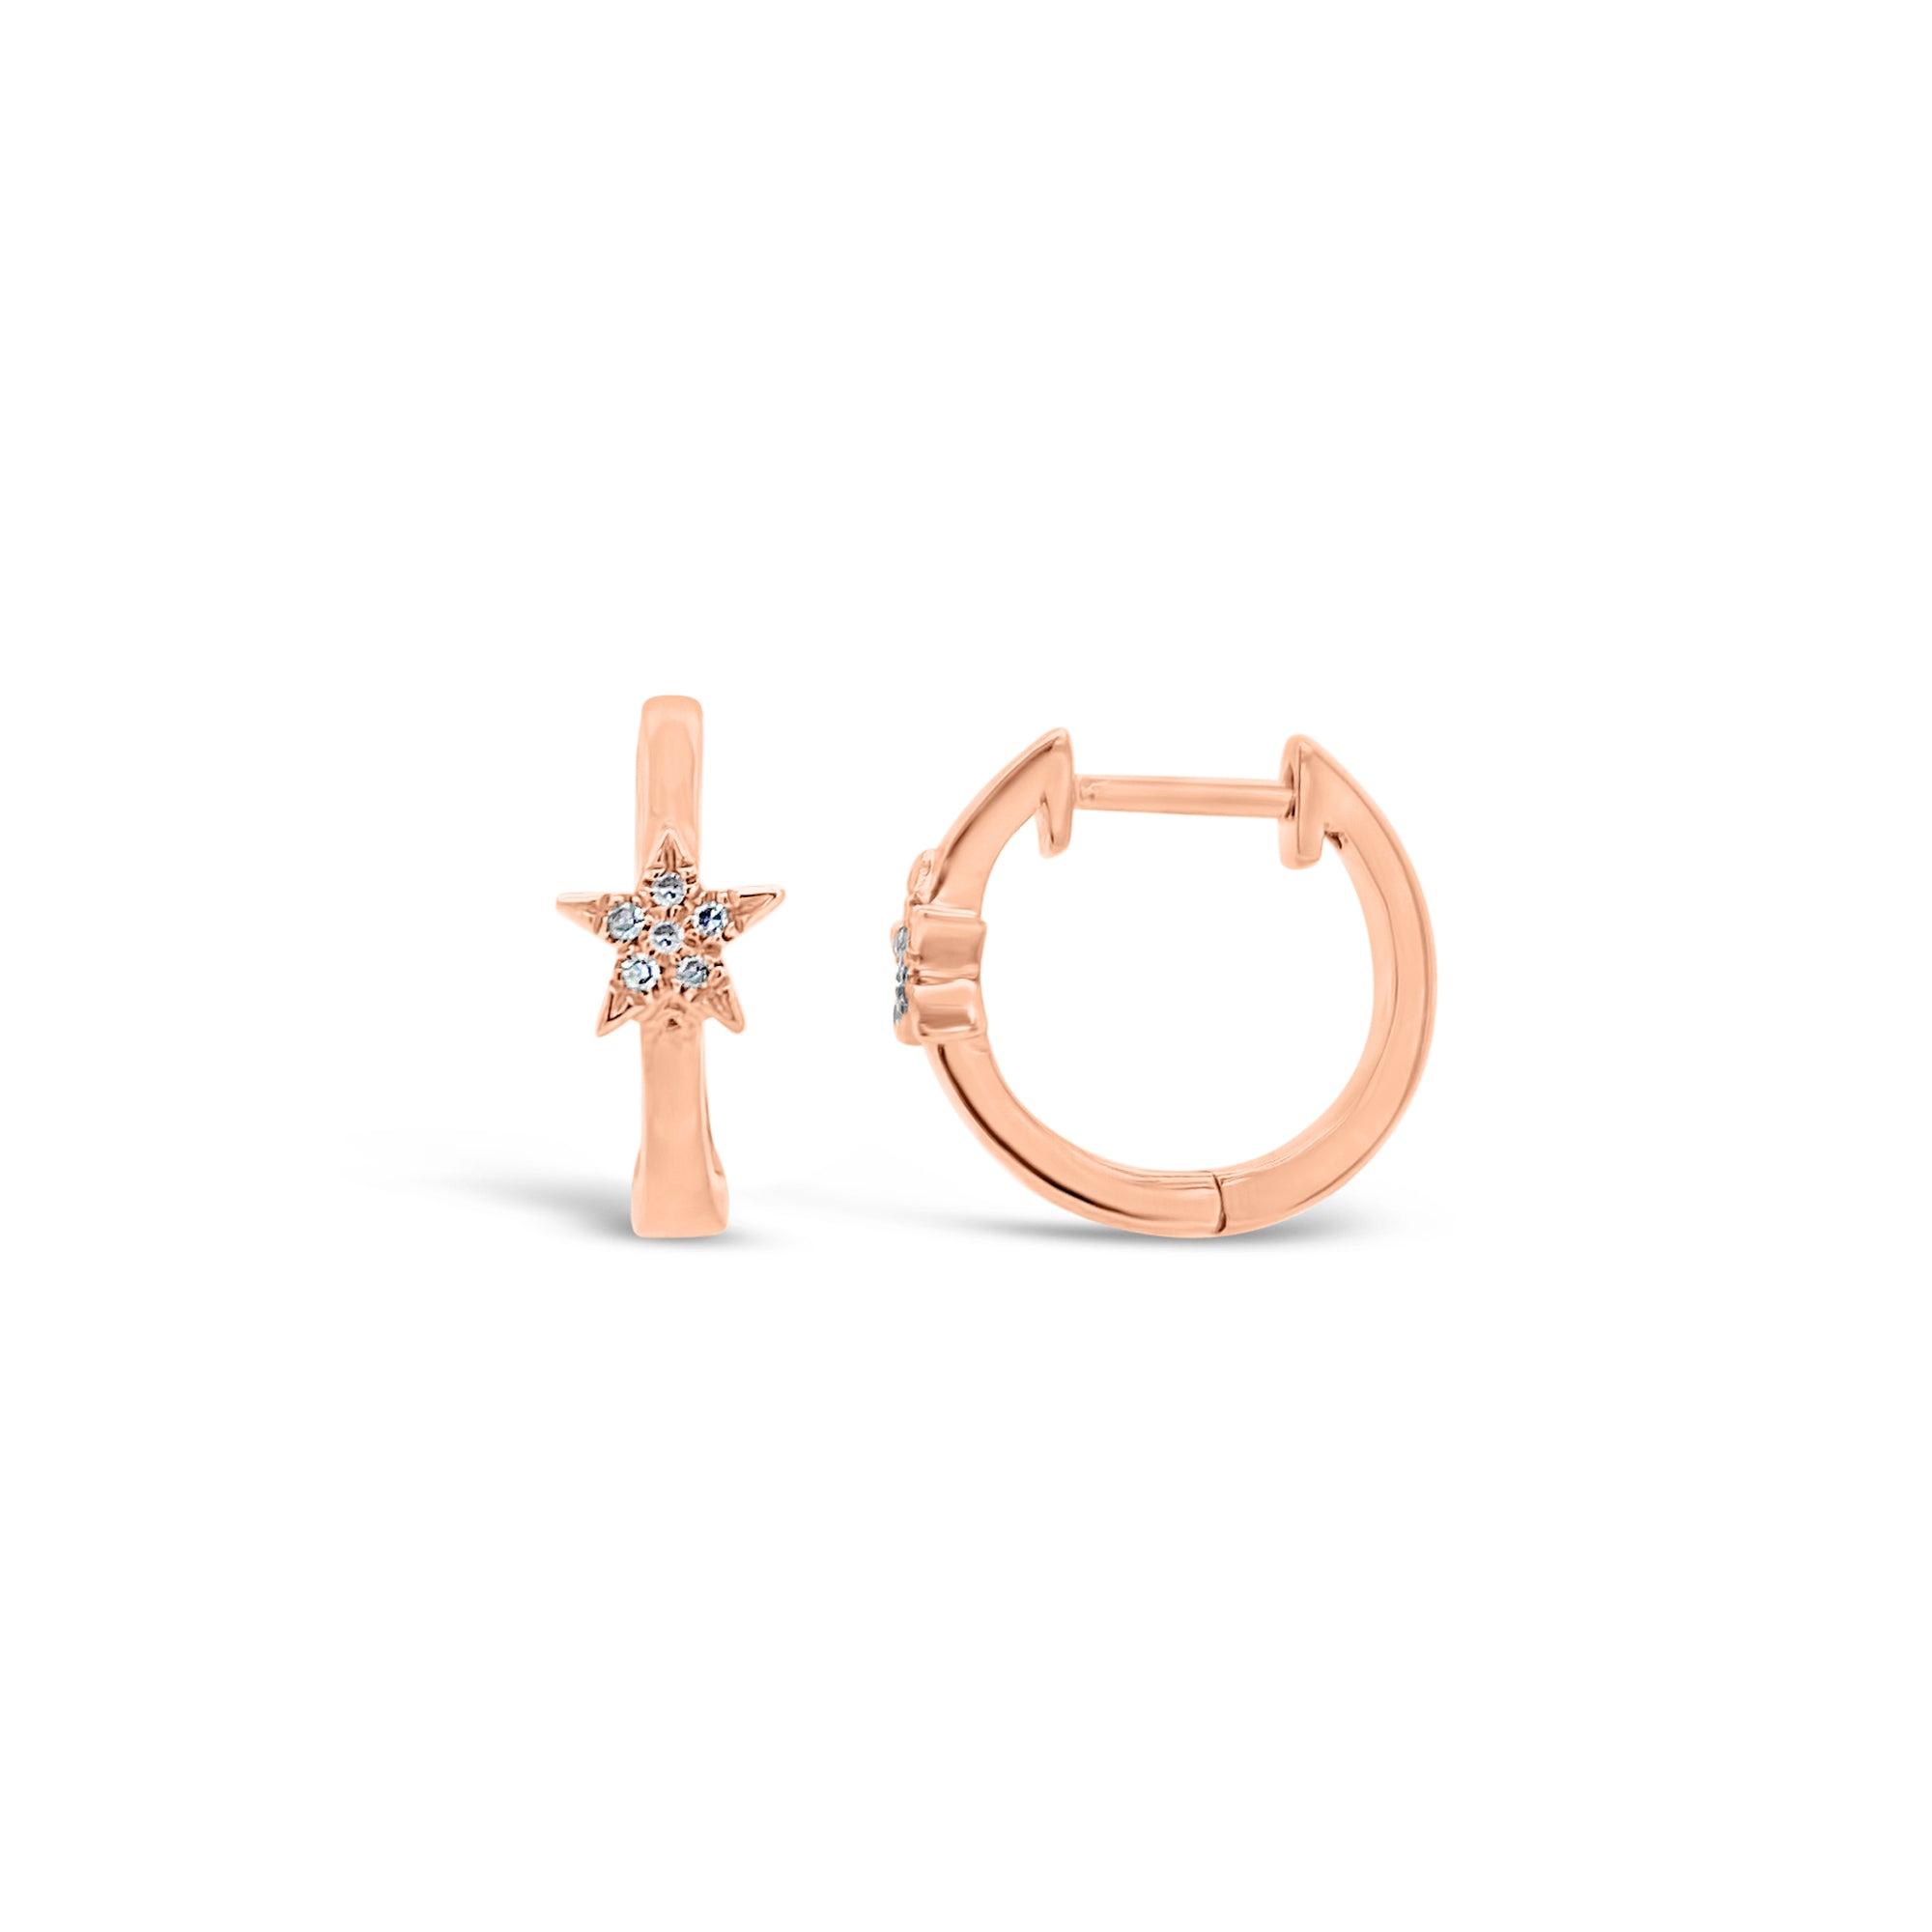 Diamond Star Accent Huggie Earrings  - 14K gold weighing 1.80 grams  - 12 round diamonds totaling 0.03 carats